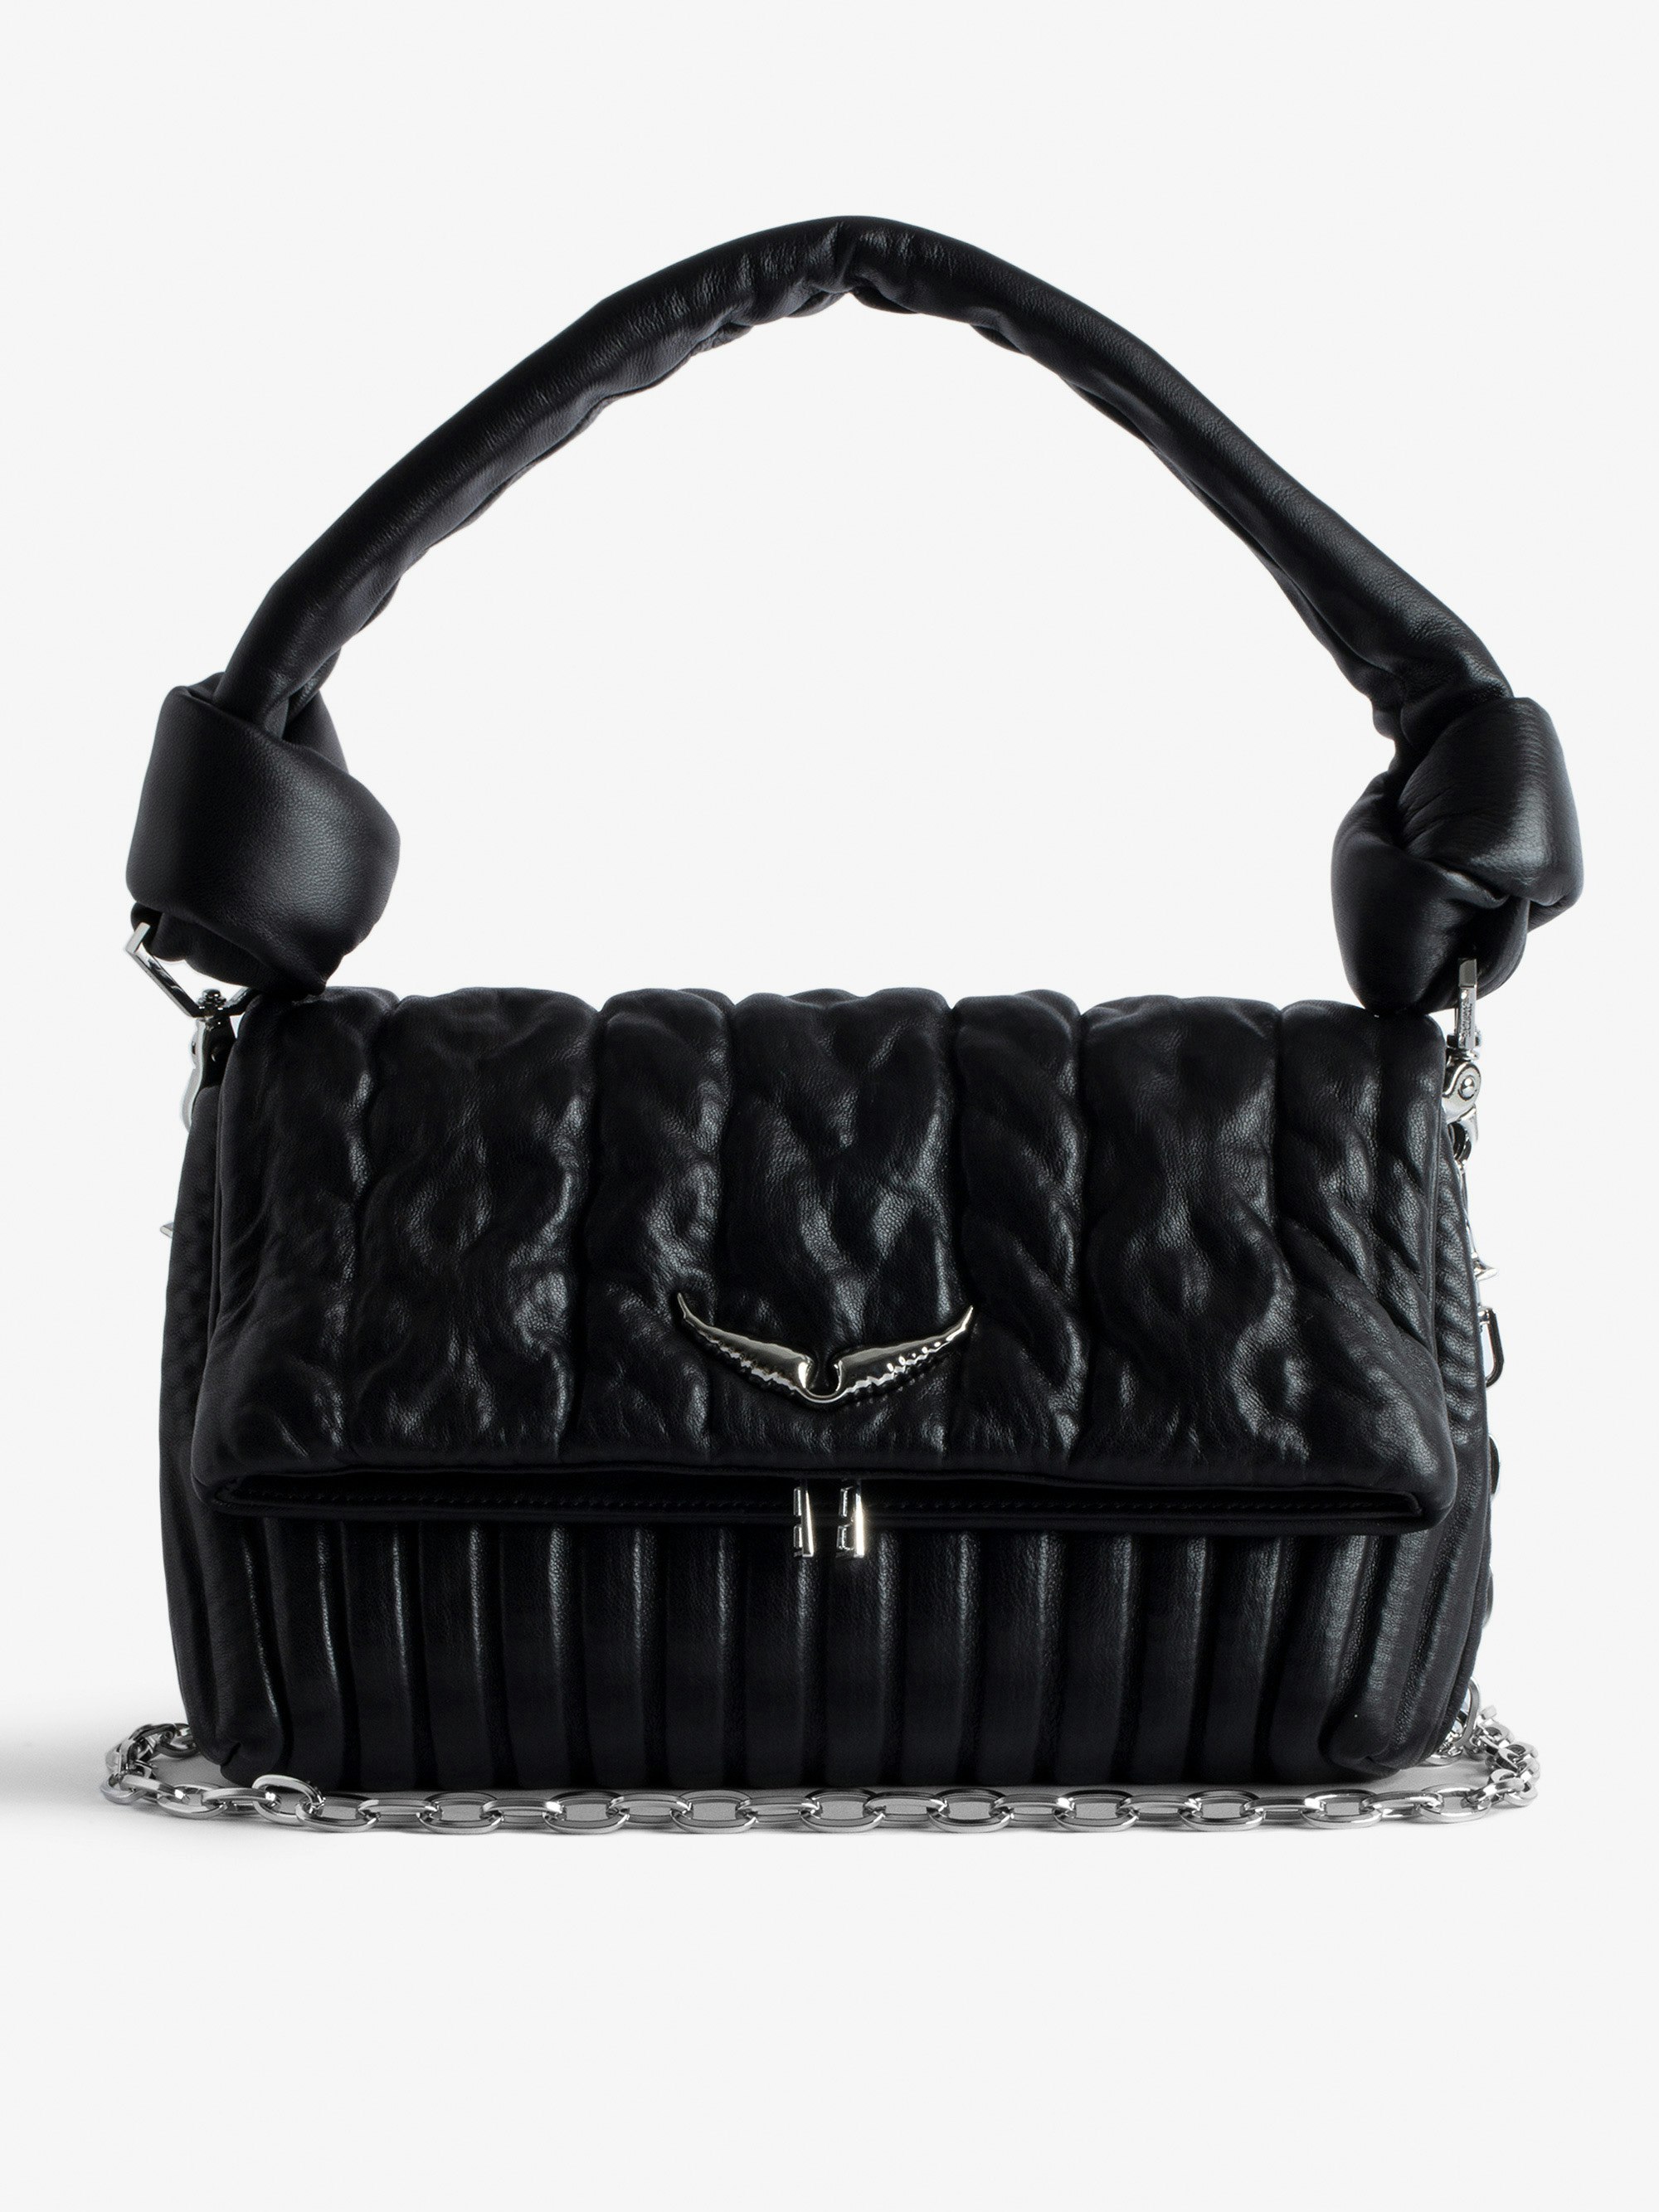 Rocky Eternal Knit Shadow Bag - Women’s black knit-effect leather bag with tied shoulder strap, chain and wings charm.